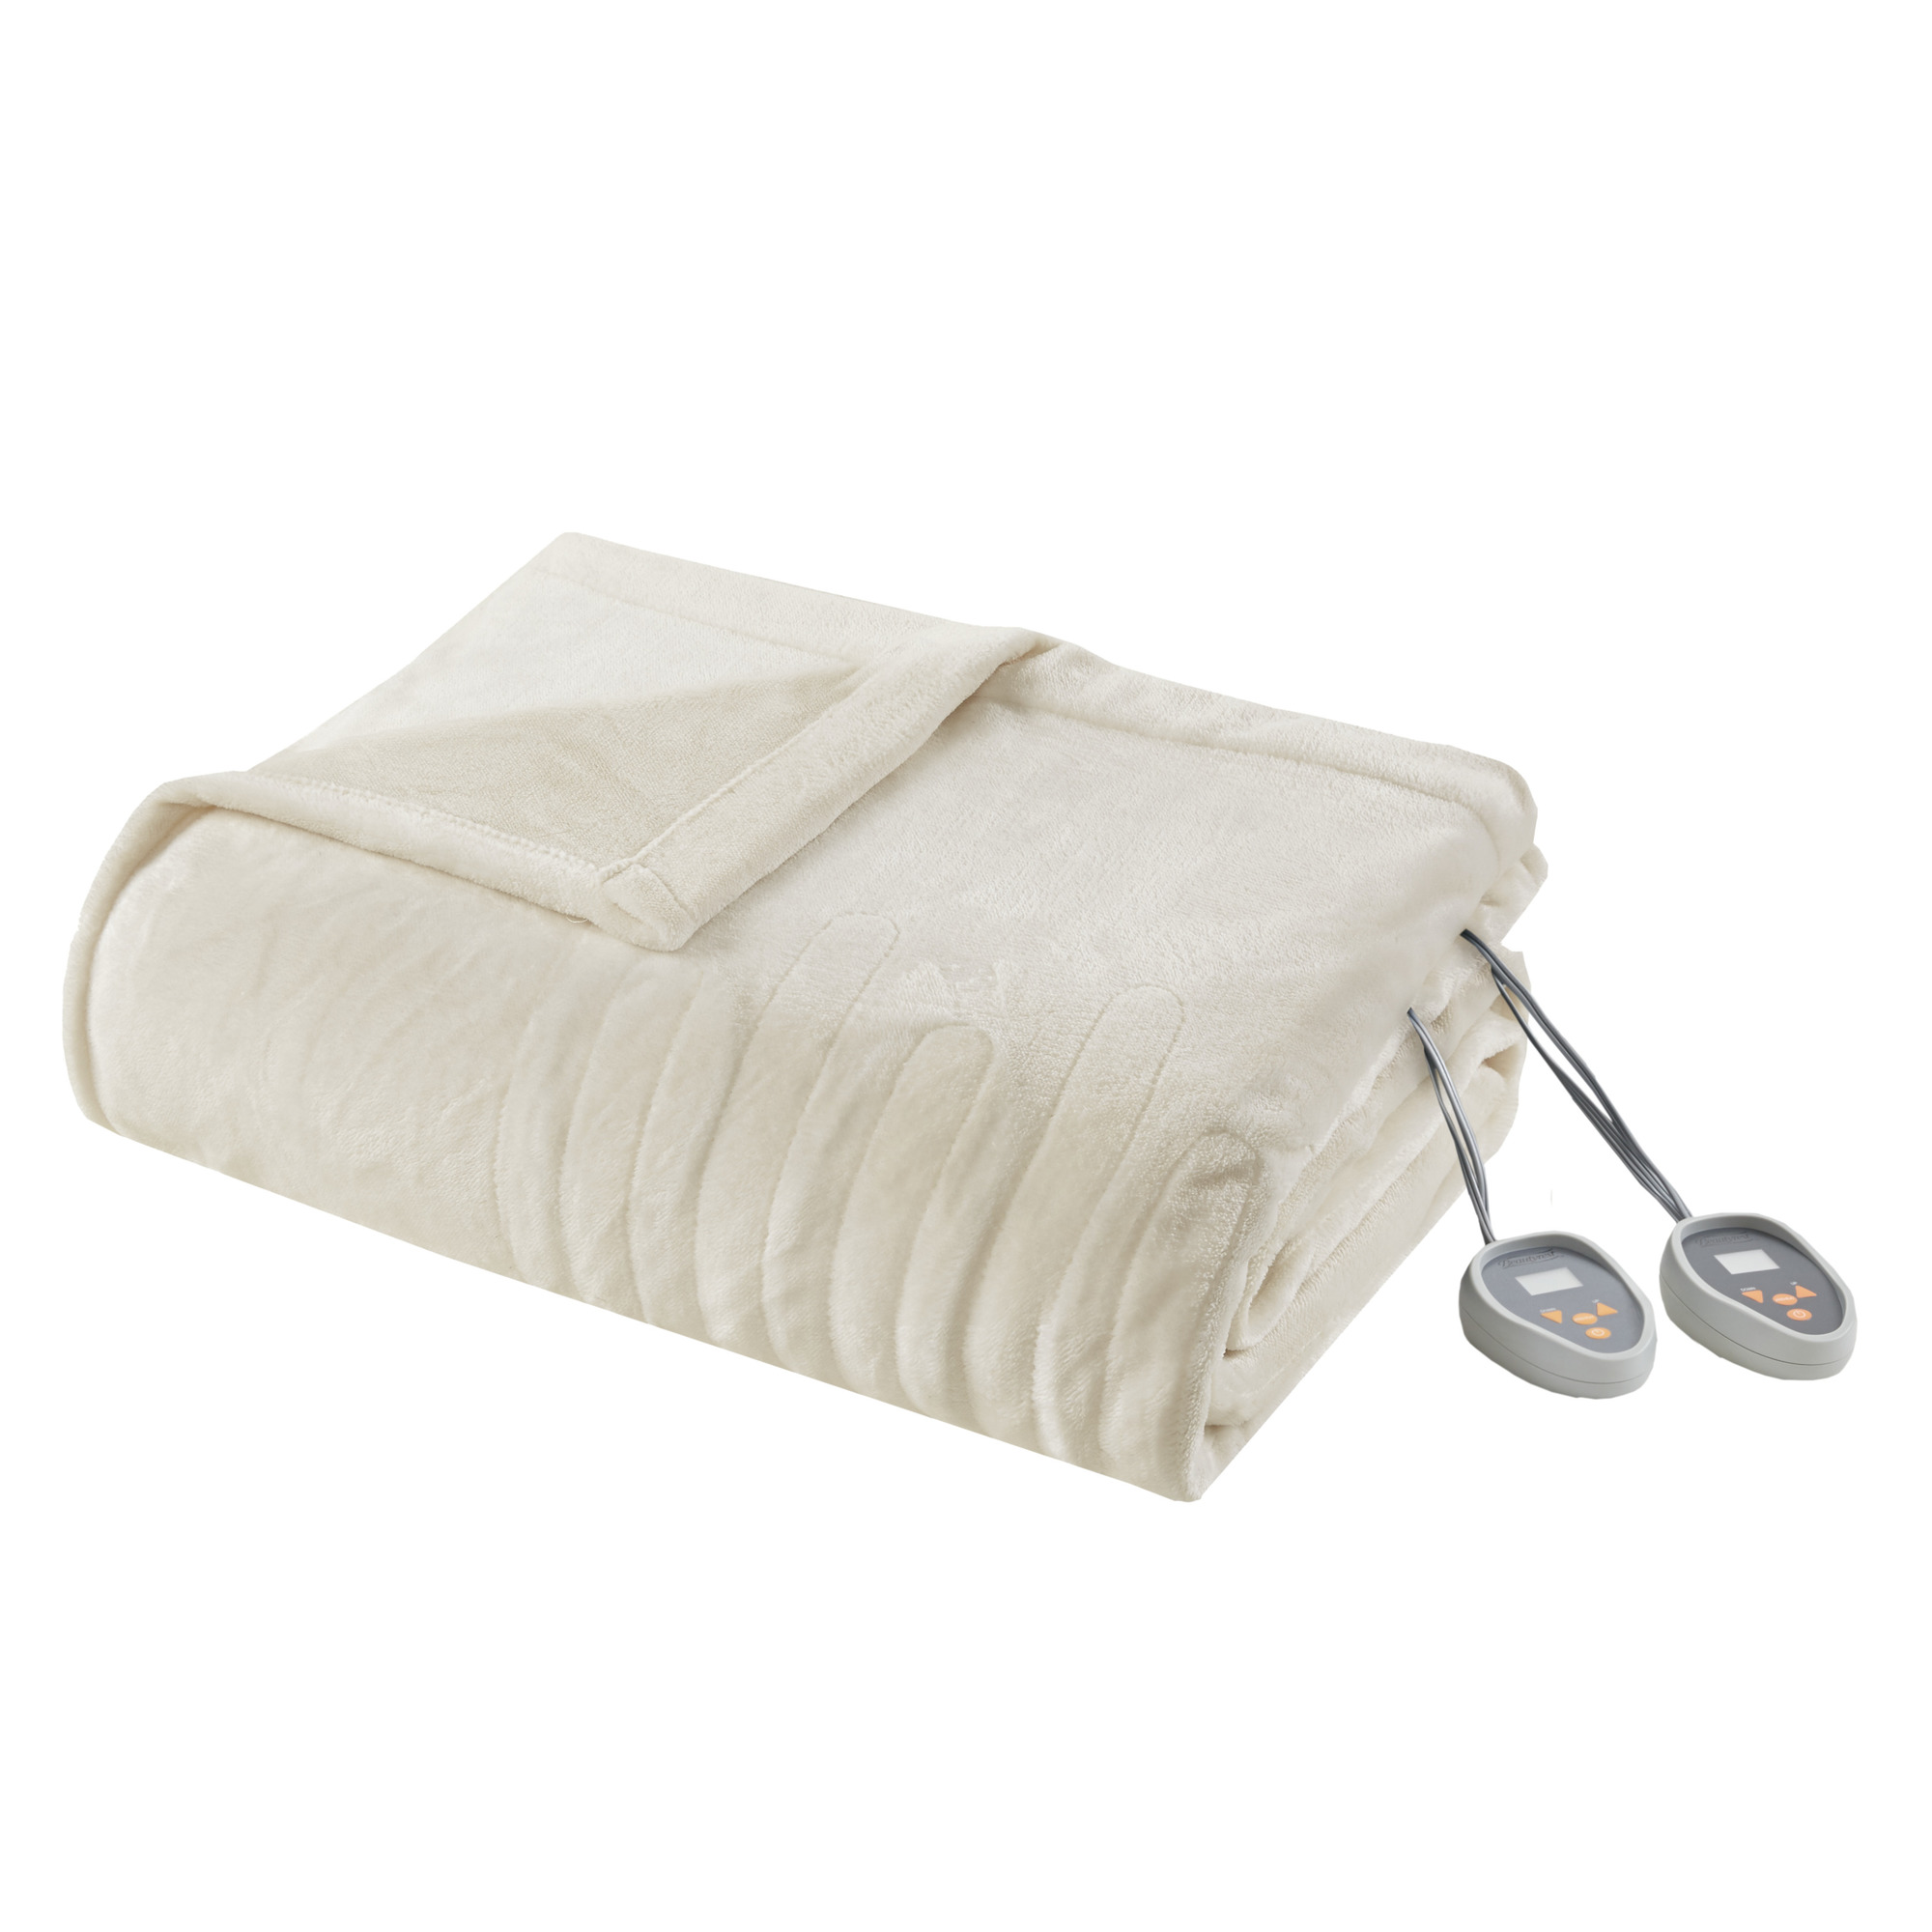 Beautyrest Heated Plush Solid Microlight Blanket, Queen, Ivory - image 4 of 9